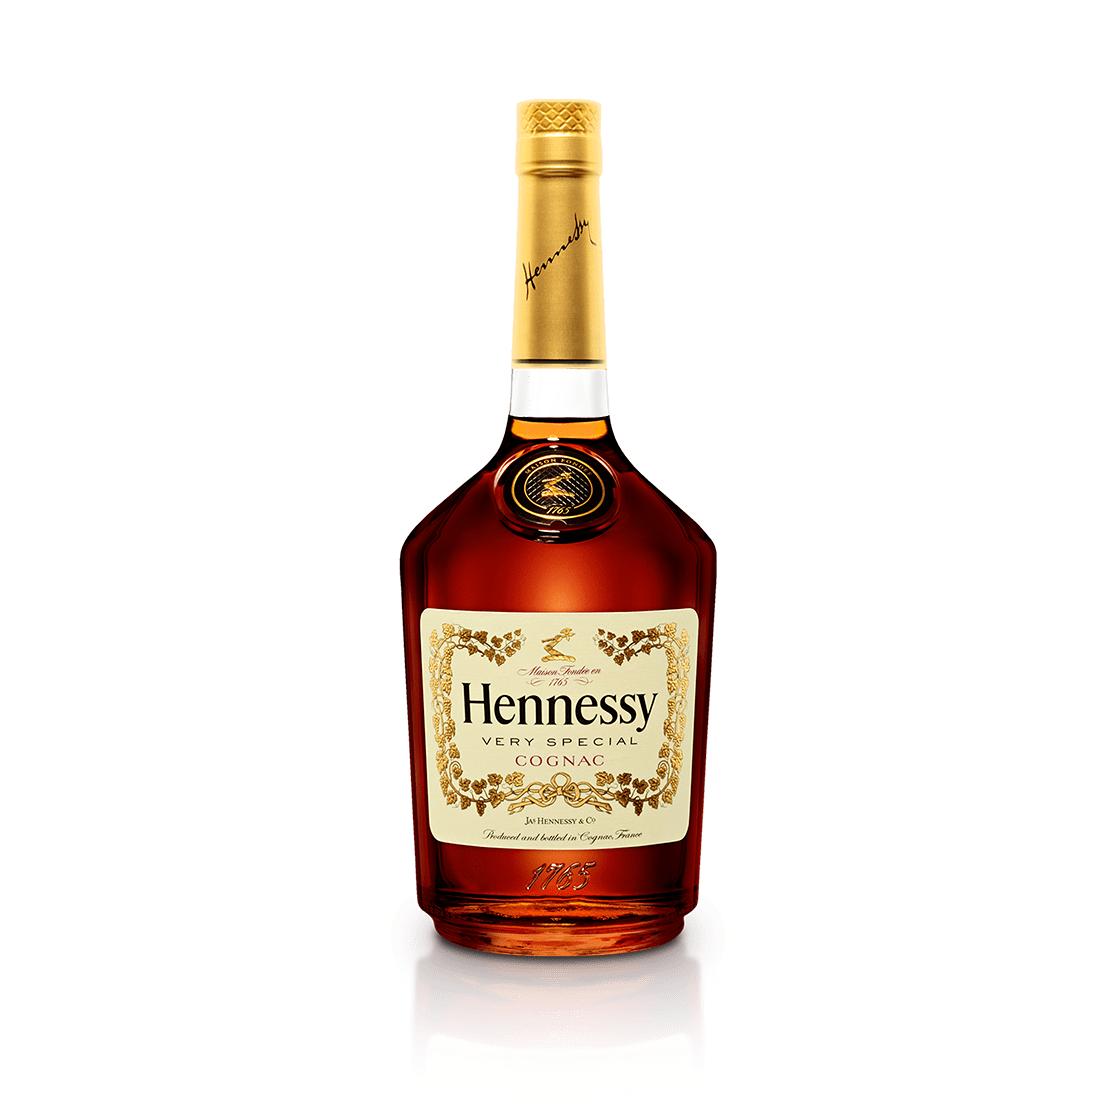 Buy Hennessy Top Products Online at Best Price | lazada.com.ph